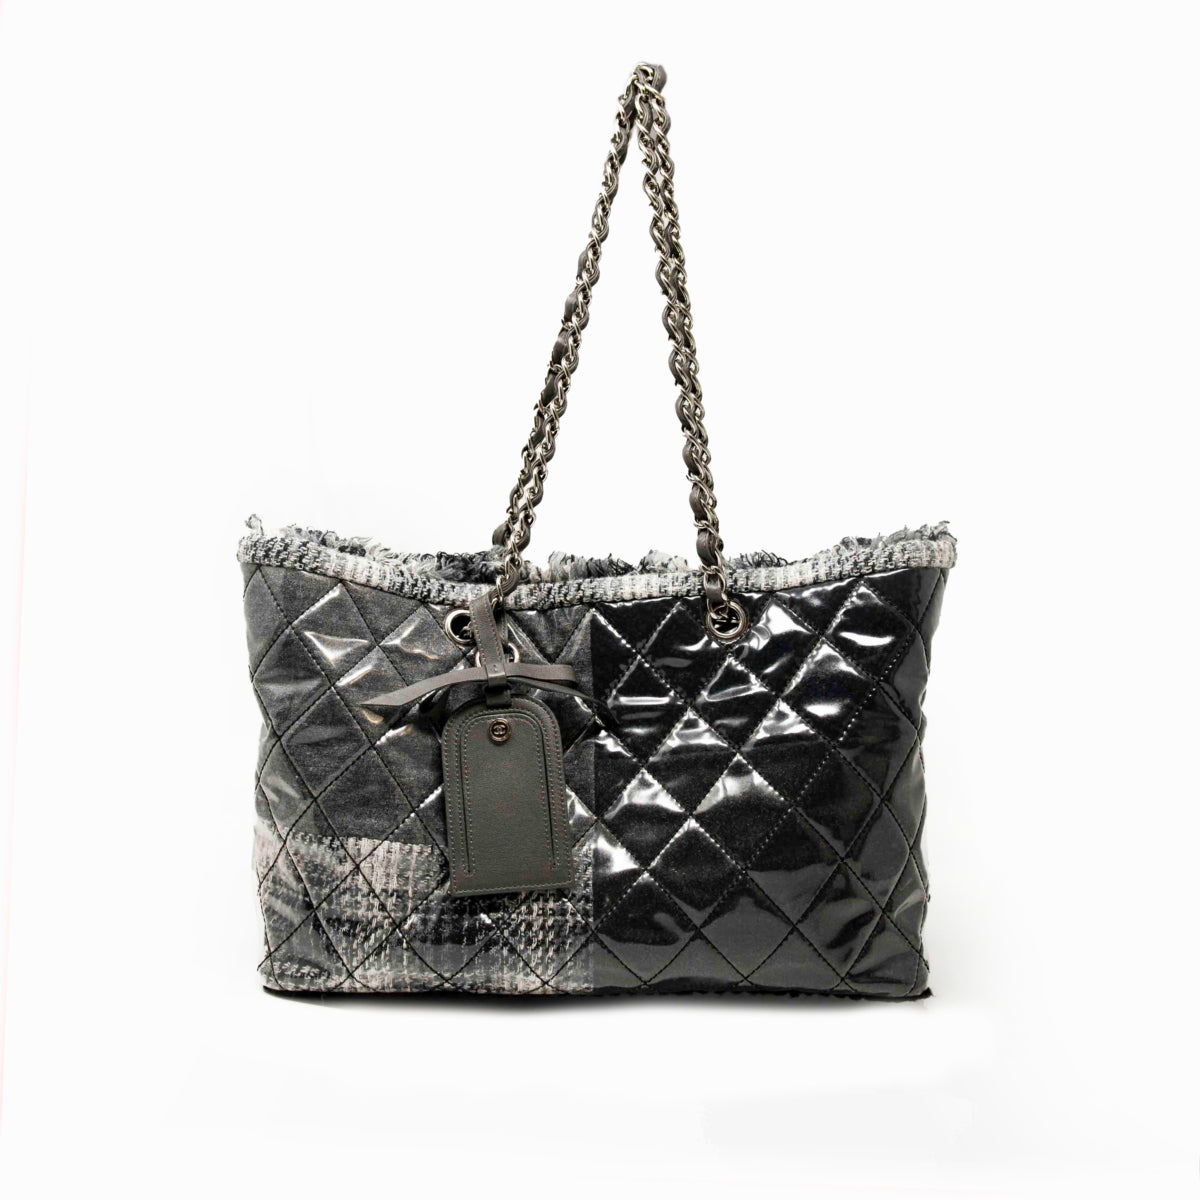 Chanel Grey Patchwork Funny Tote